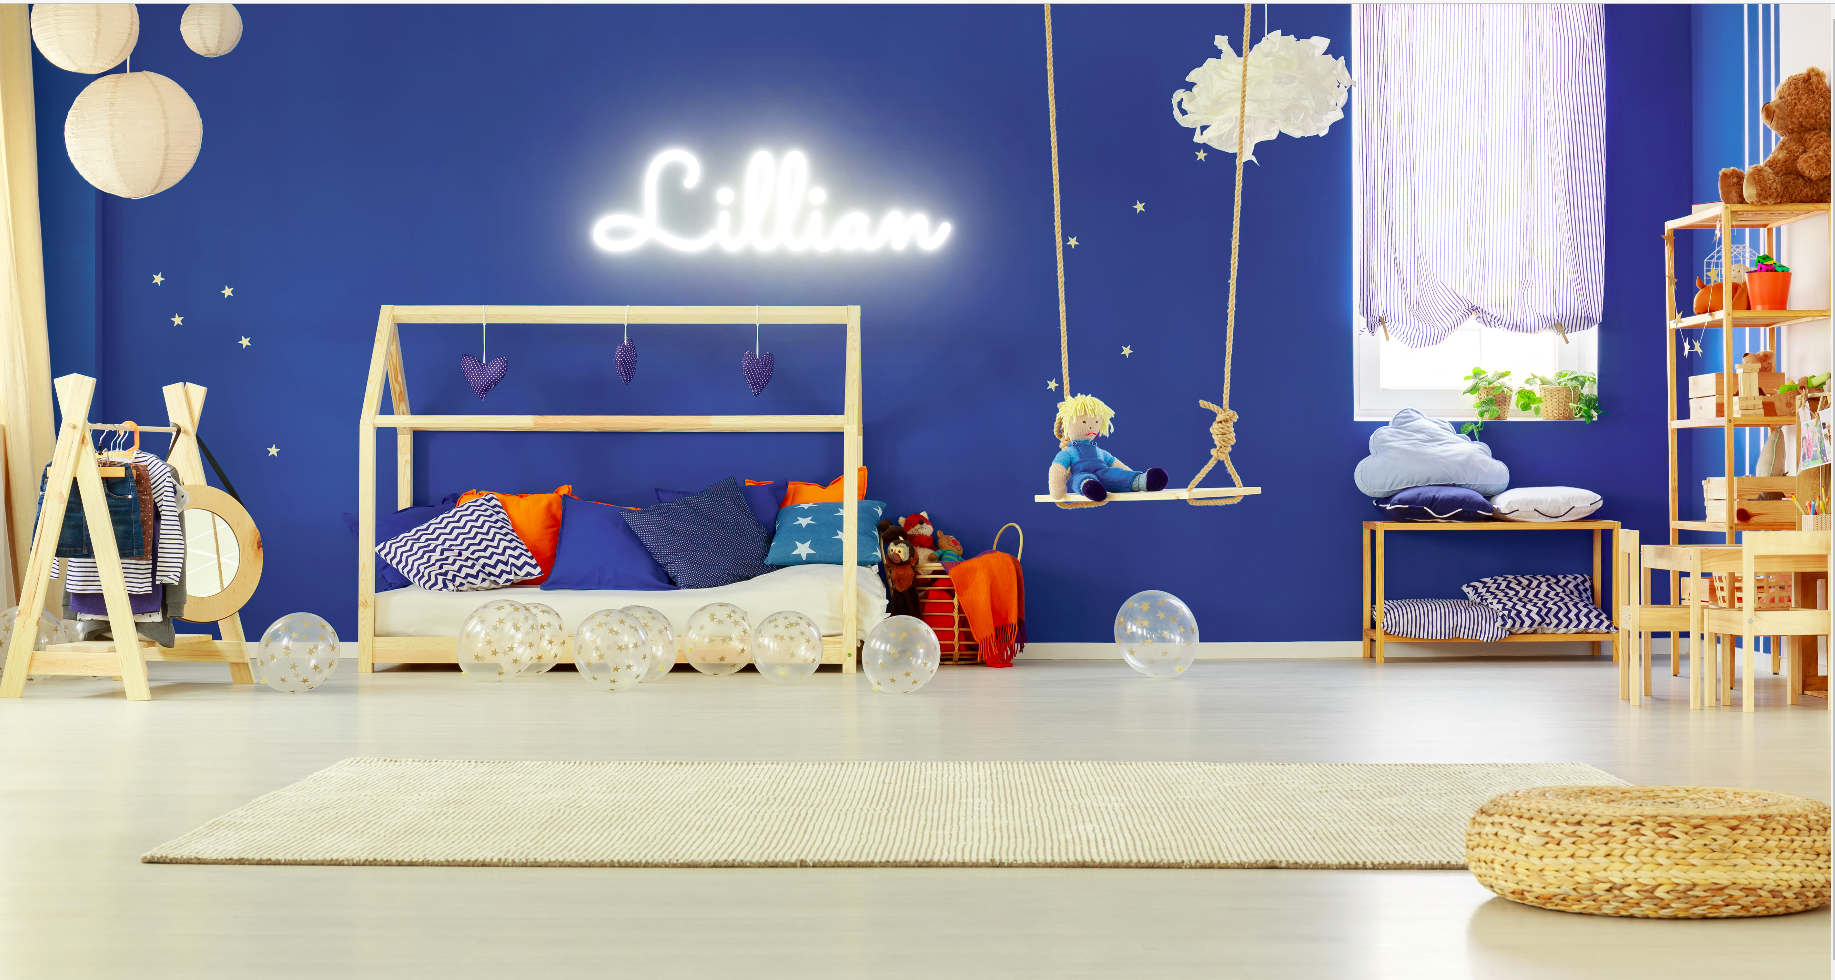 "Lillian" Baby Name LED Neon Sign